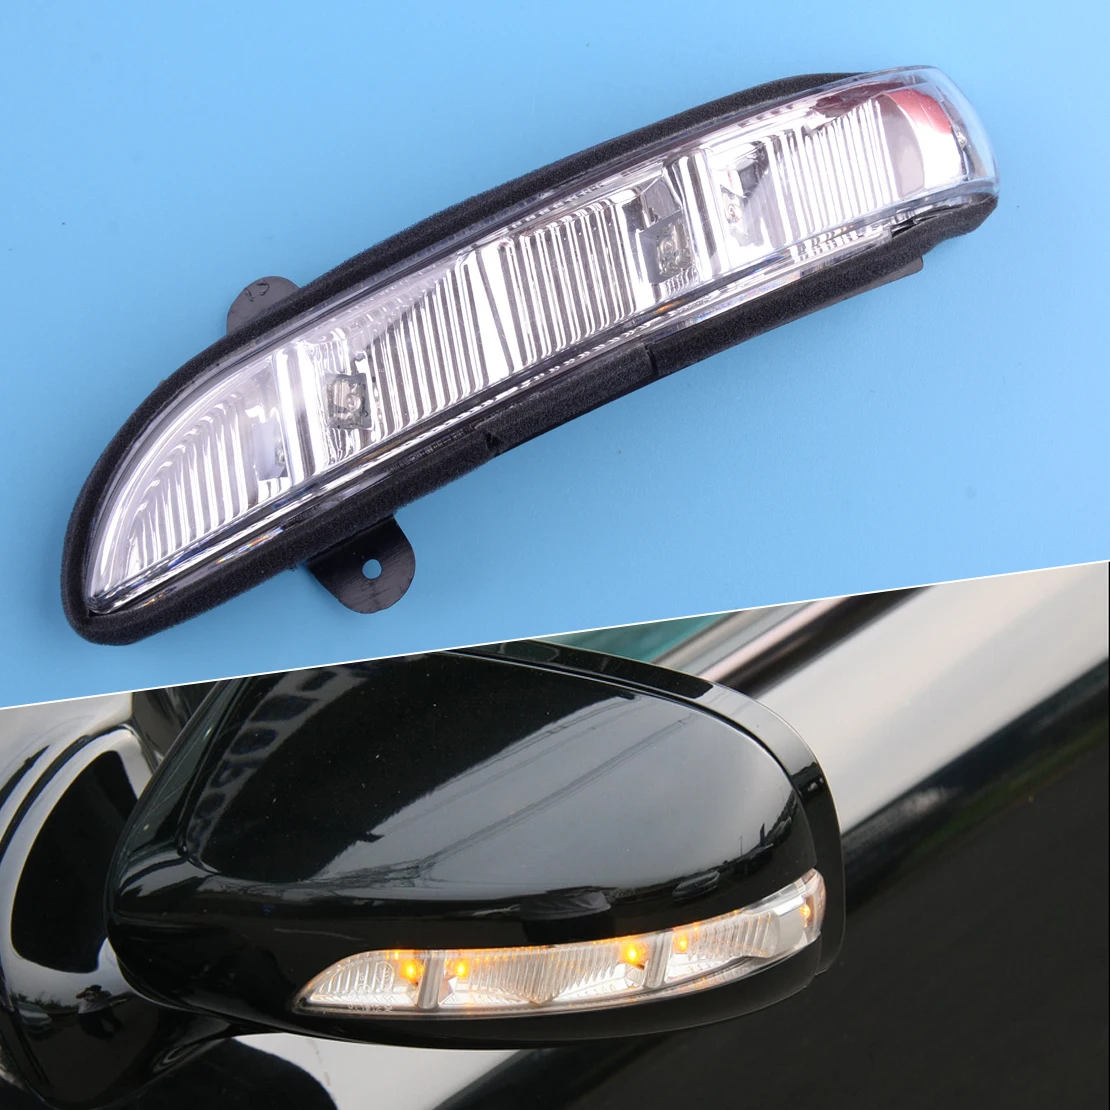 

Left Side Door Wing Rearview Mirror LED Turn Signal Light Fit for Mercedes-Benz CL W216 CLS W219 S W221 E Class W211 2198200521